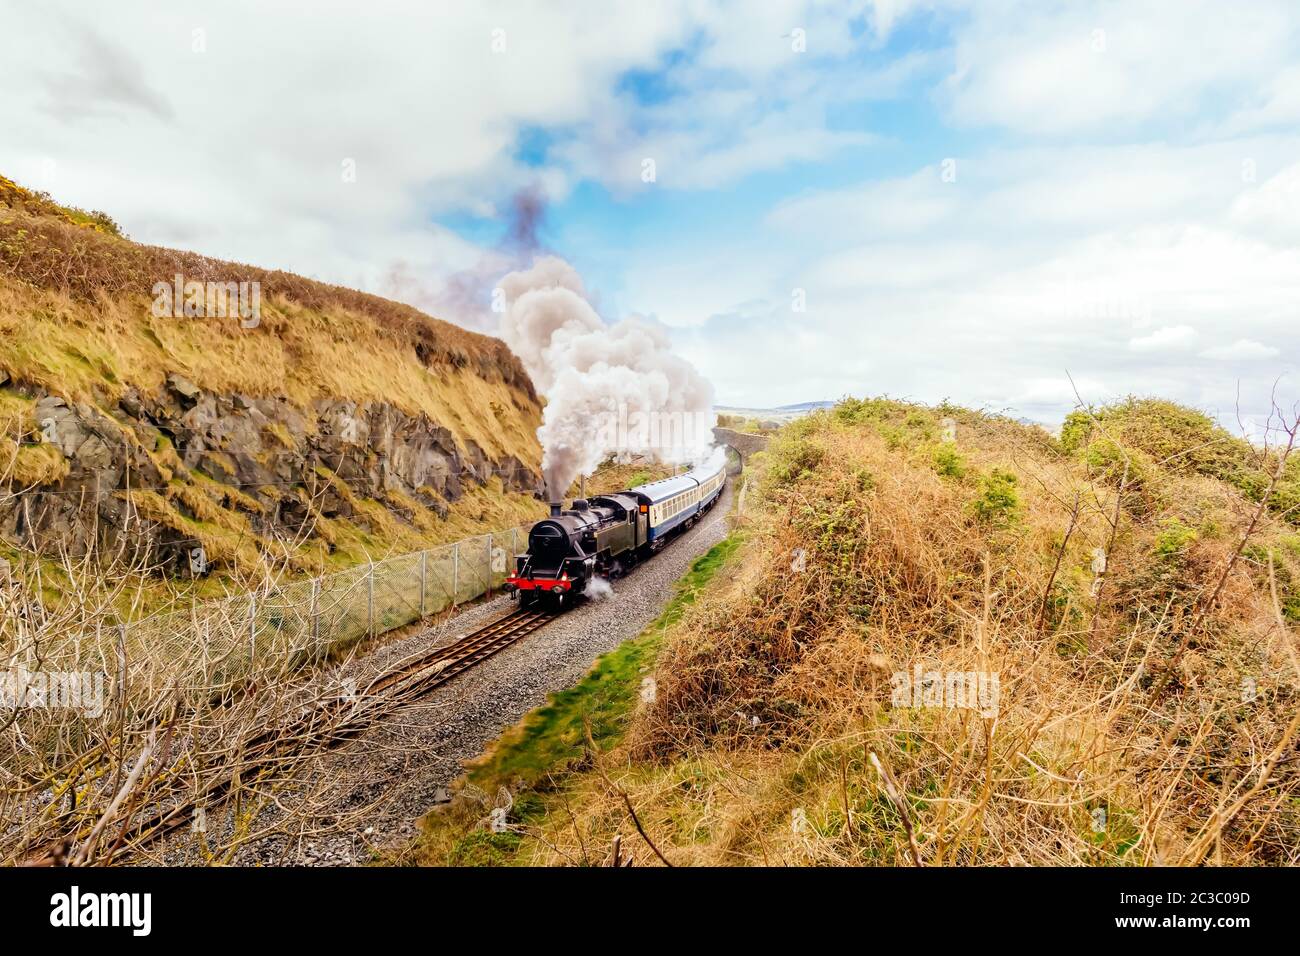 Large steam train or locomotive with passenger carriages on costal railway between Bray and Greystones, Ireland Stock Photo